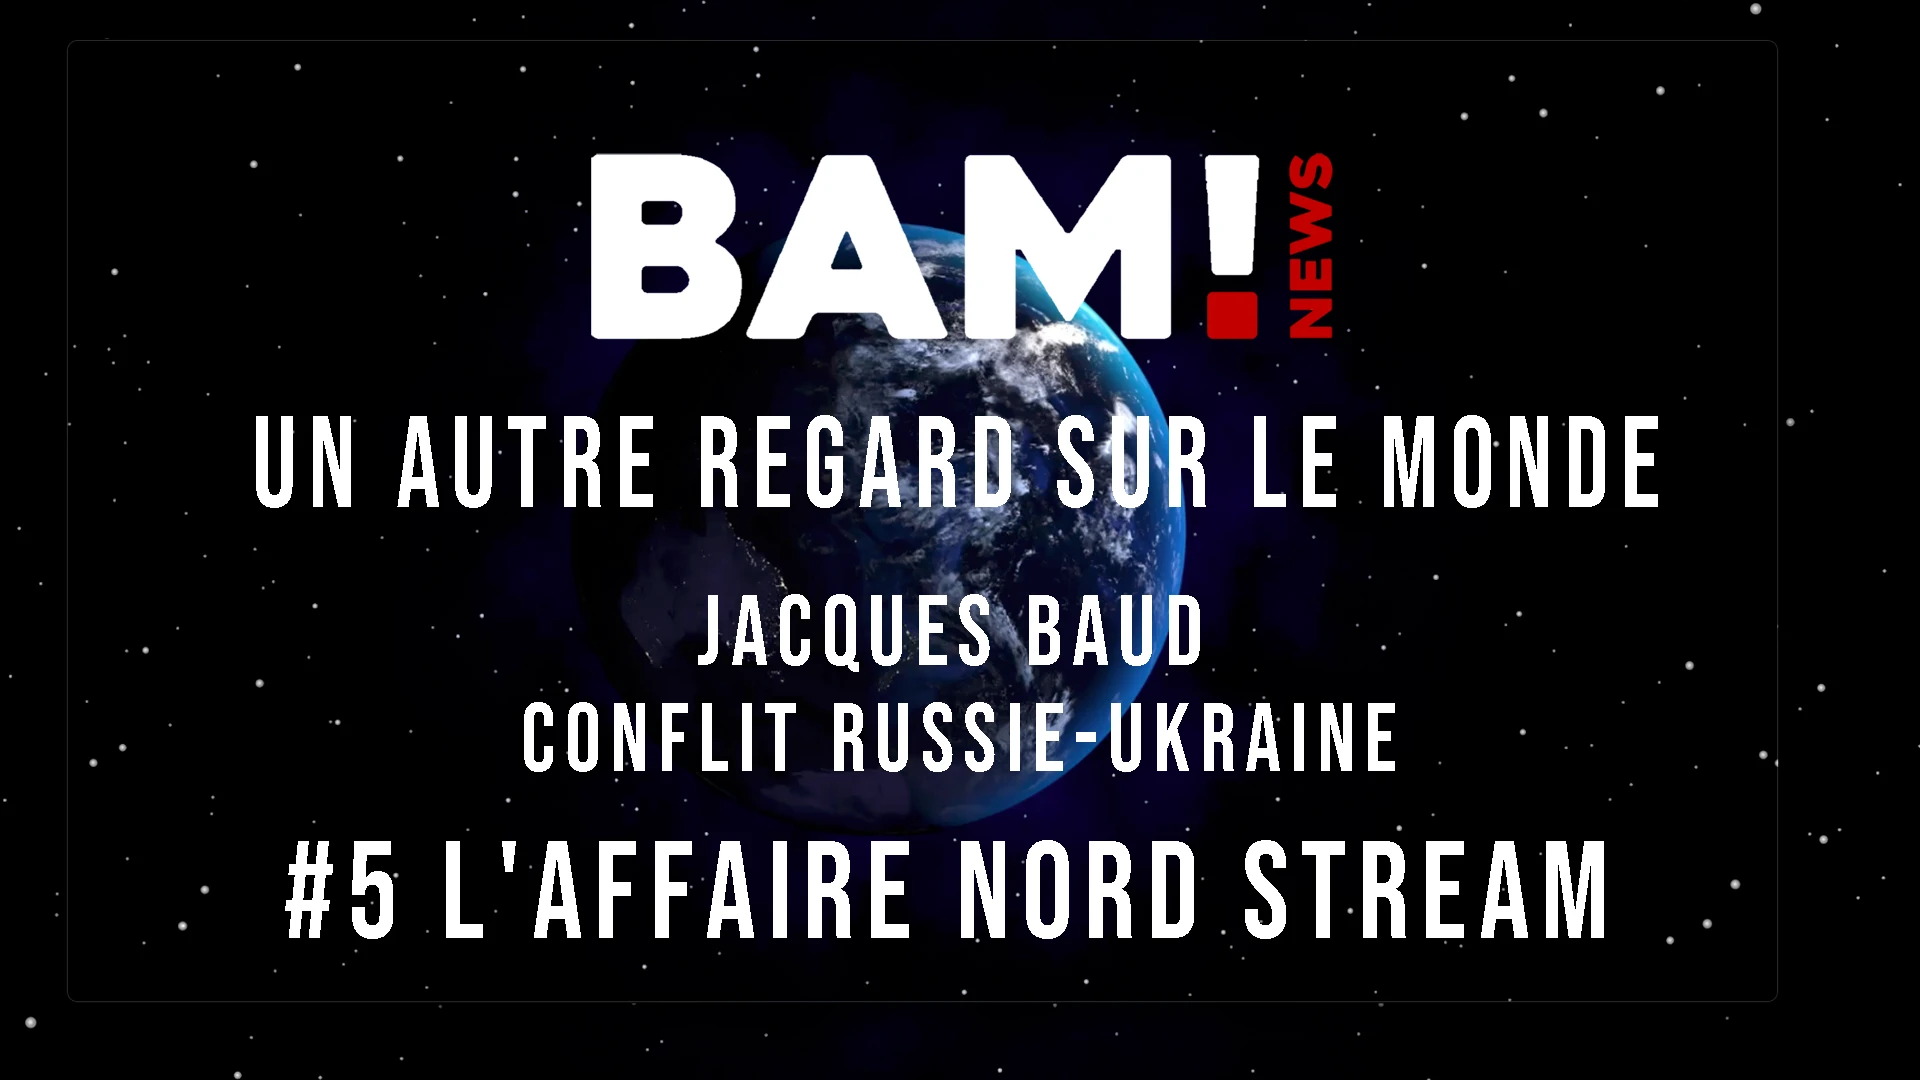 Jacques Baud #5 L’affaire Nord Stream